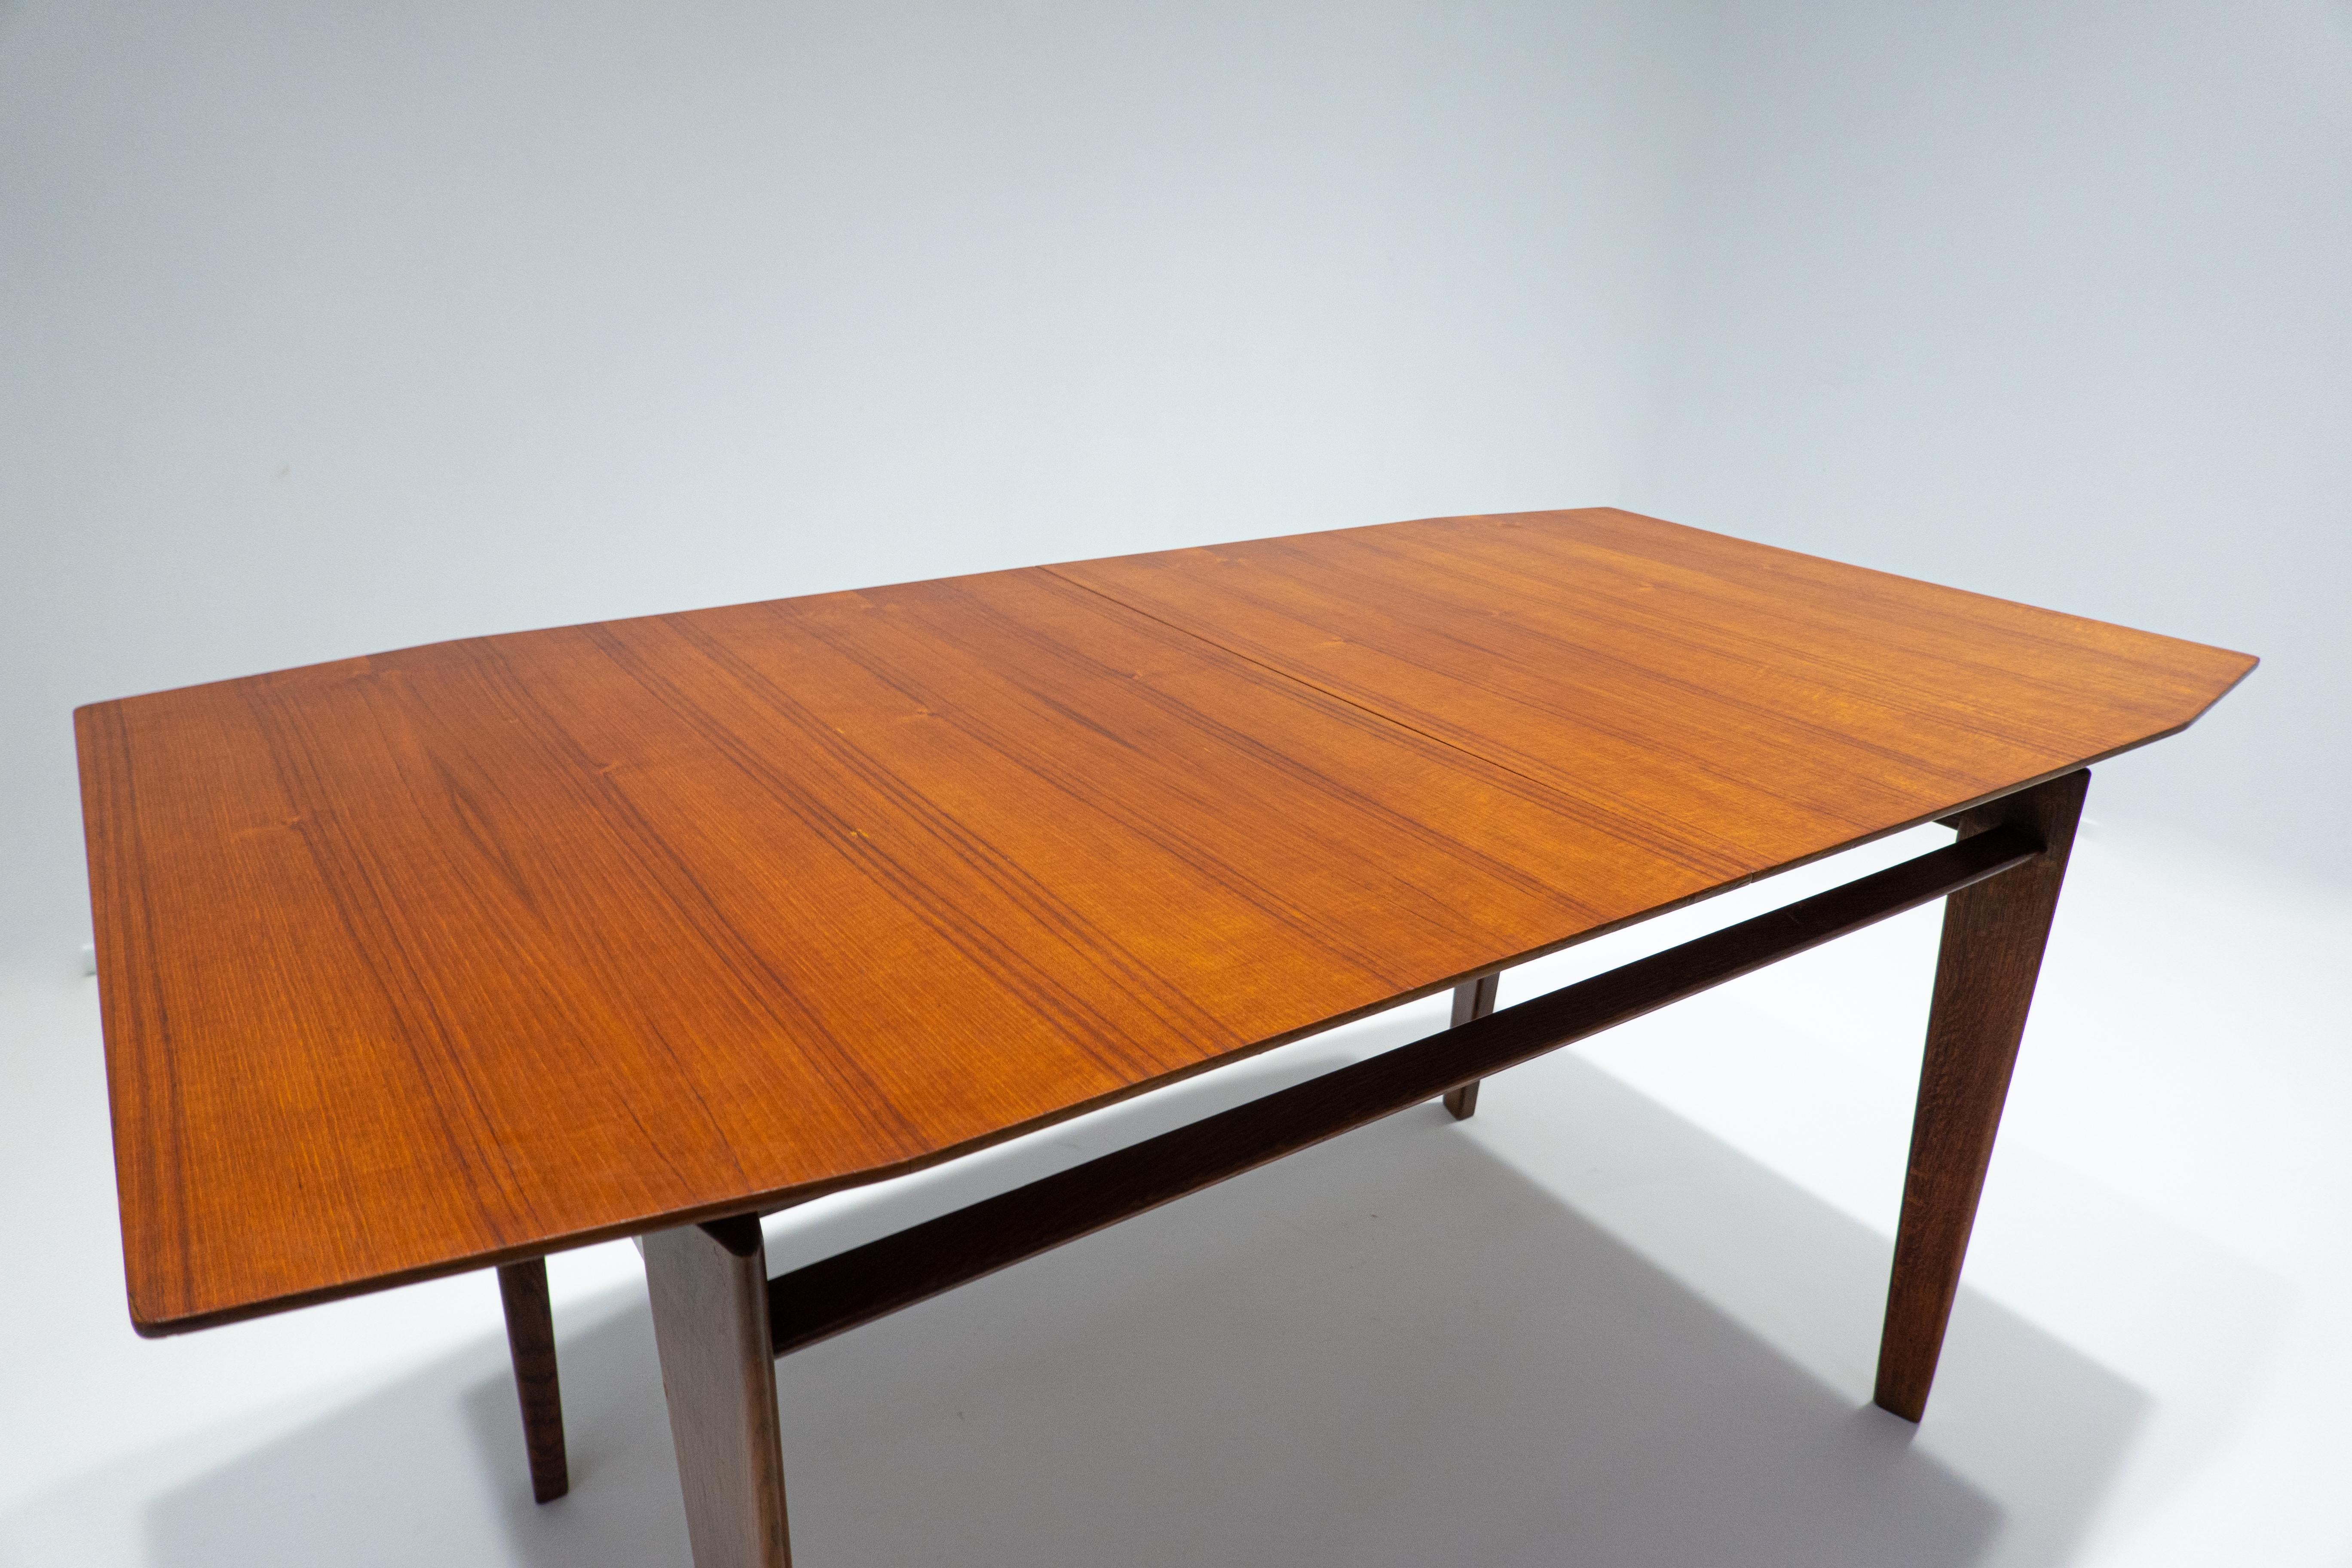 20th Century Mid-Century Modern Extendable Dining Table by Vittorio Dassi, Teak, Italy, 1950s For Sale